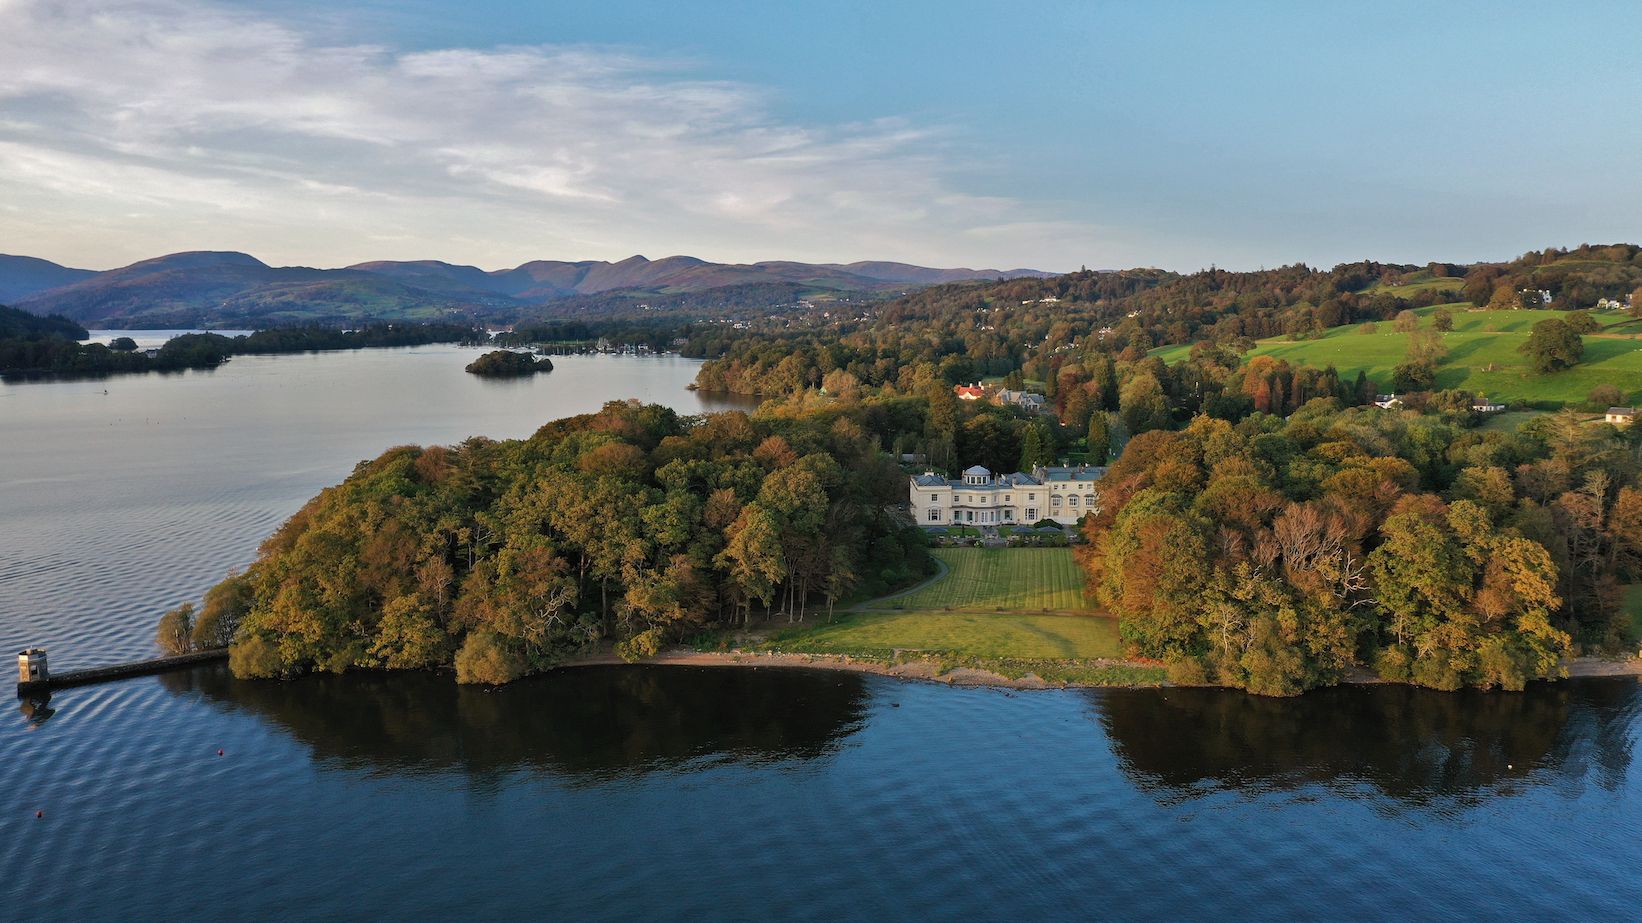 Best hotels in from to Grasmere